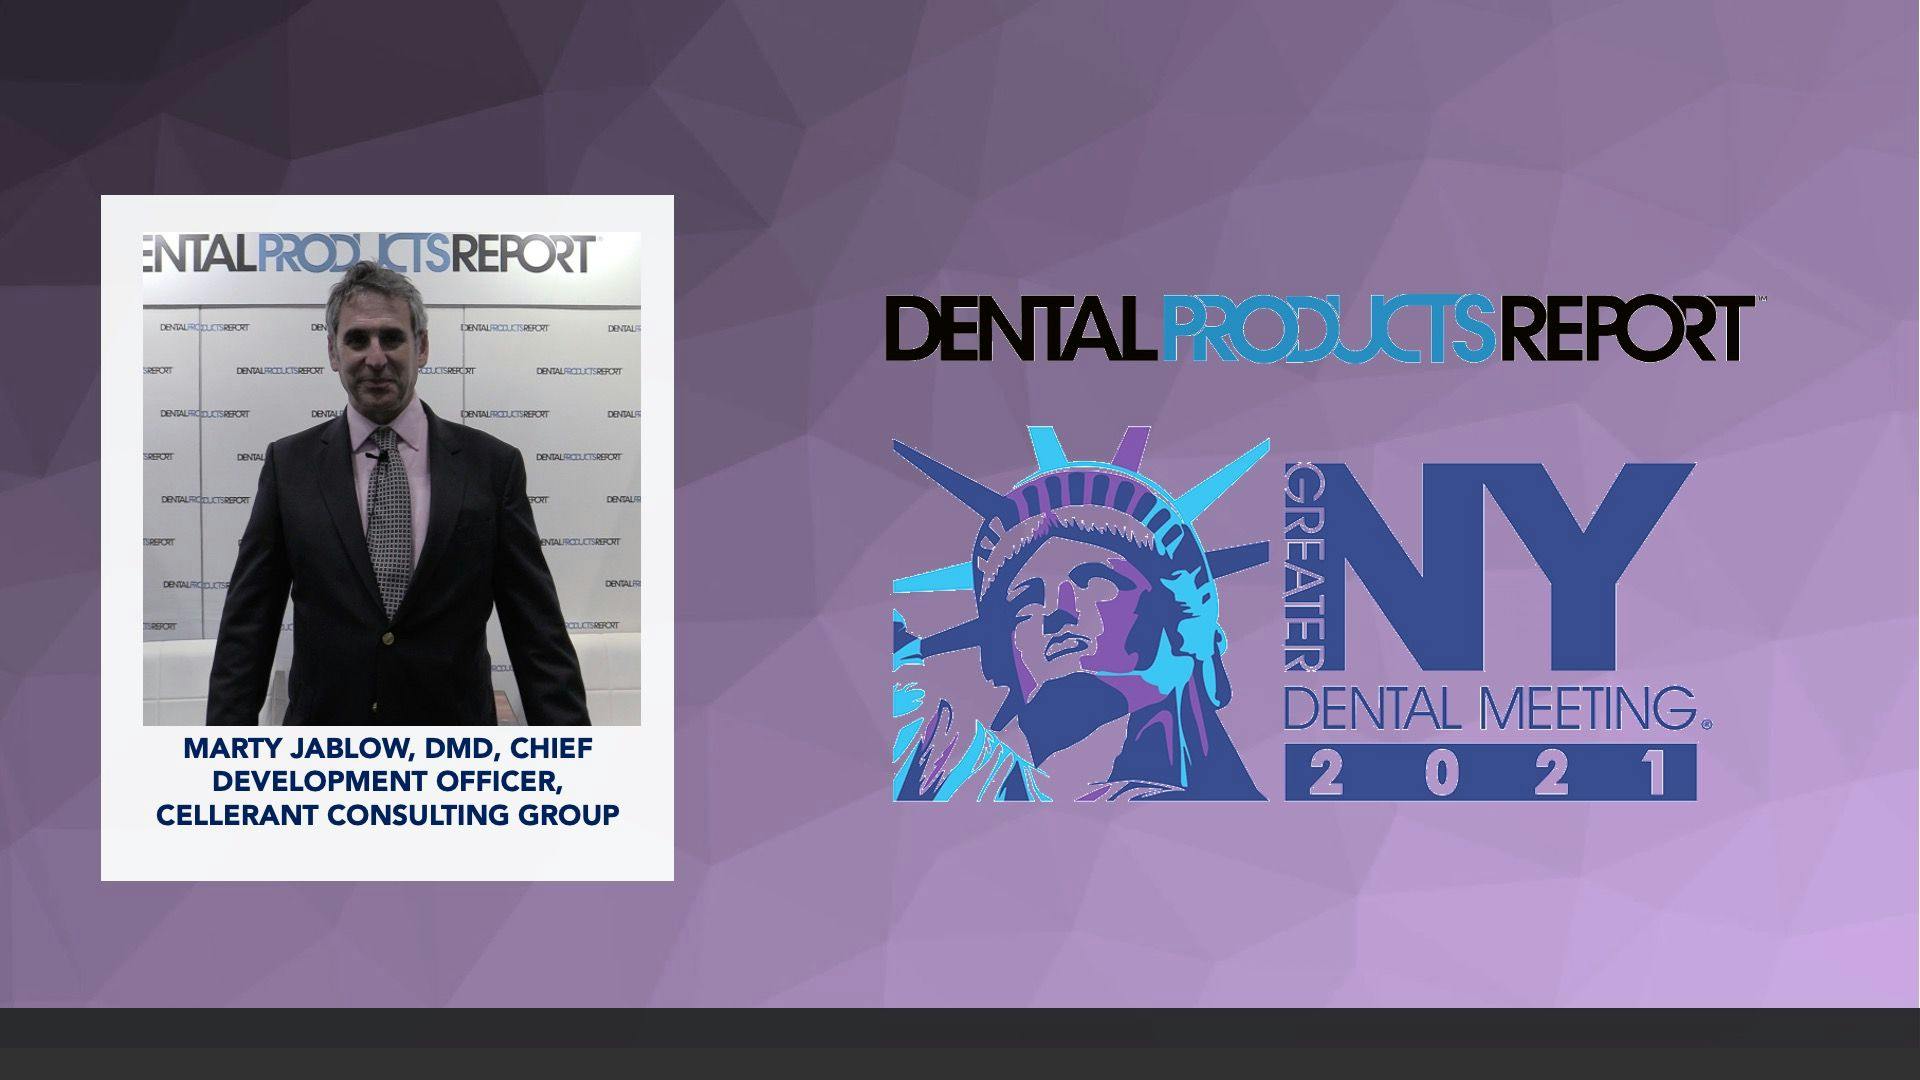 Greater New York Dental Meeting 2021 - Interview with Marty Jablow, DMD